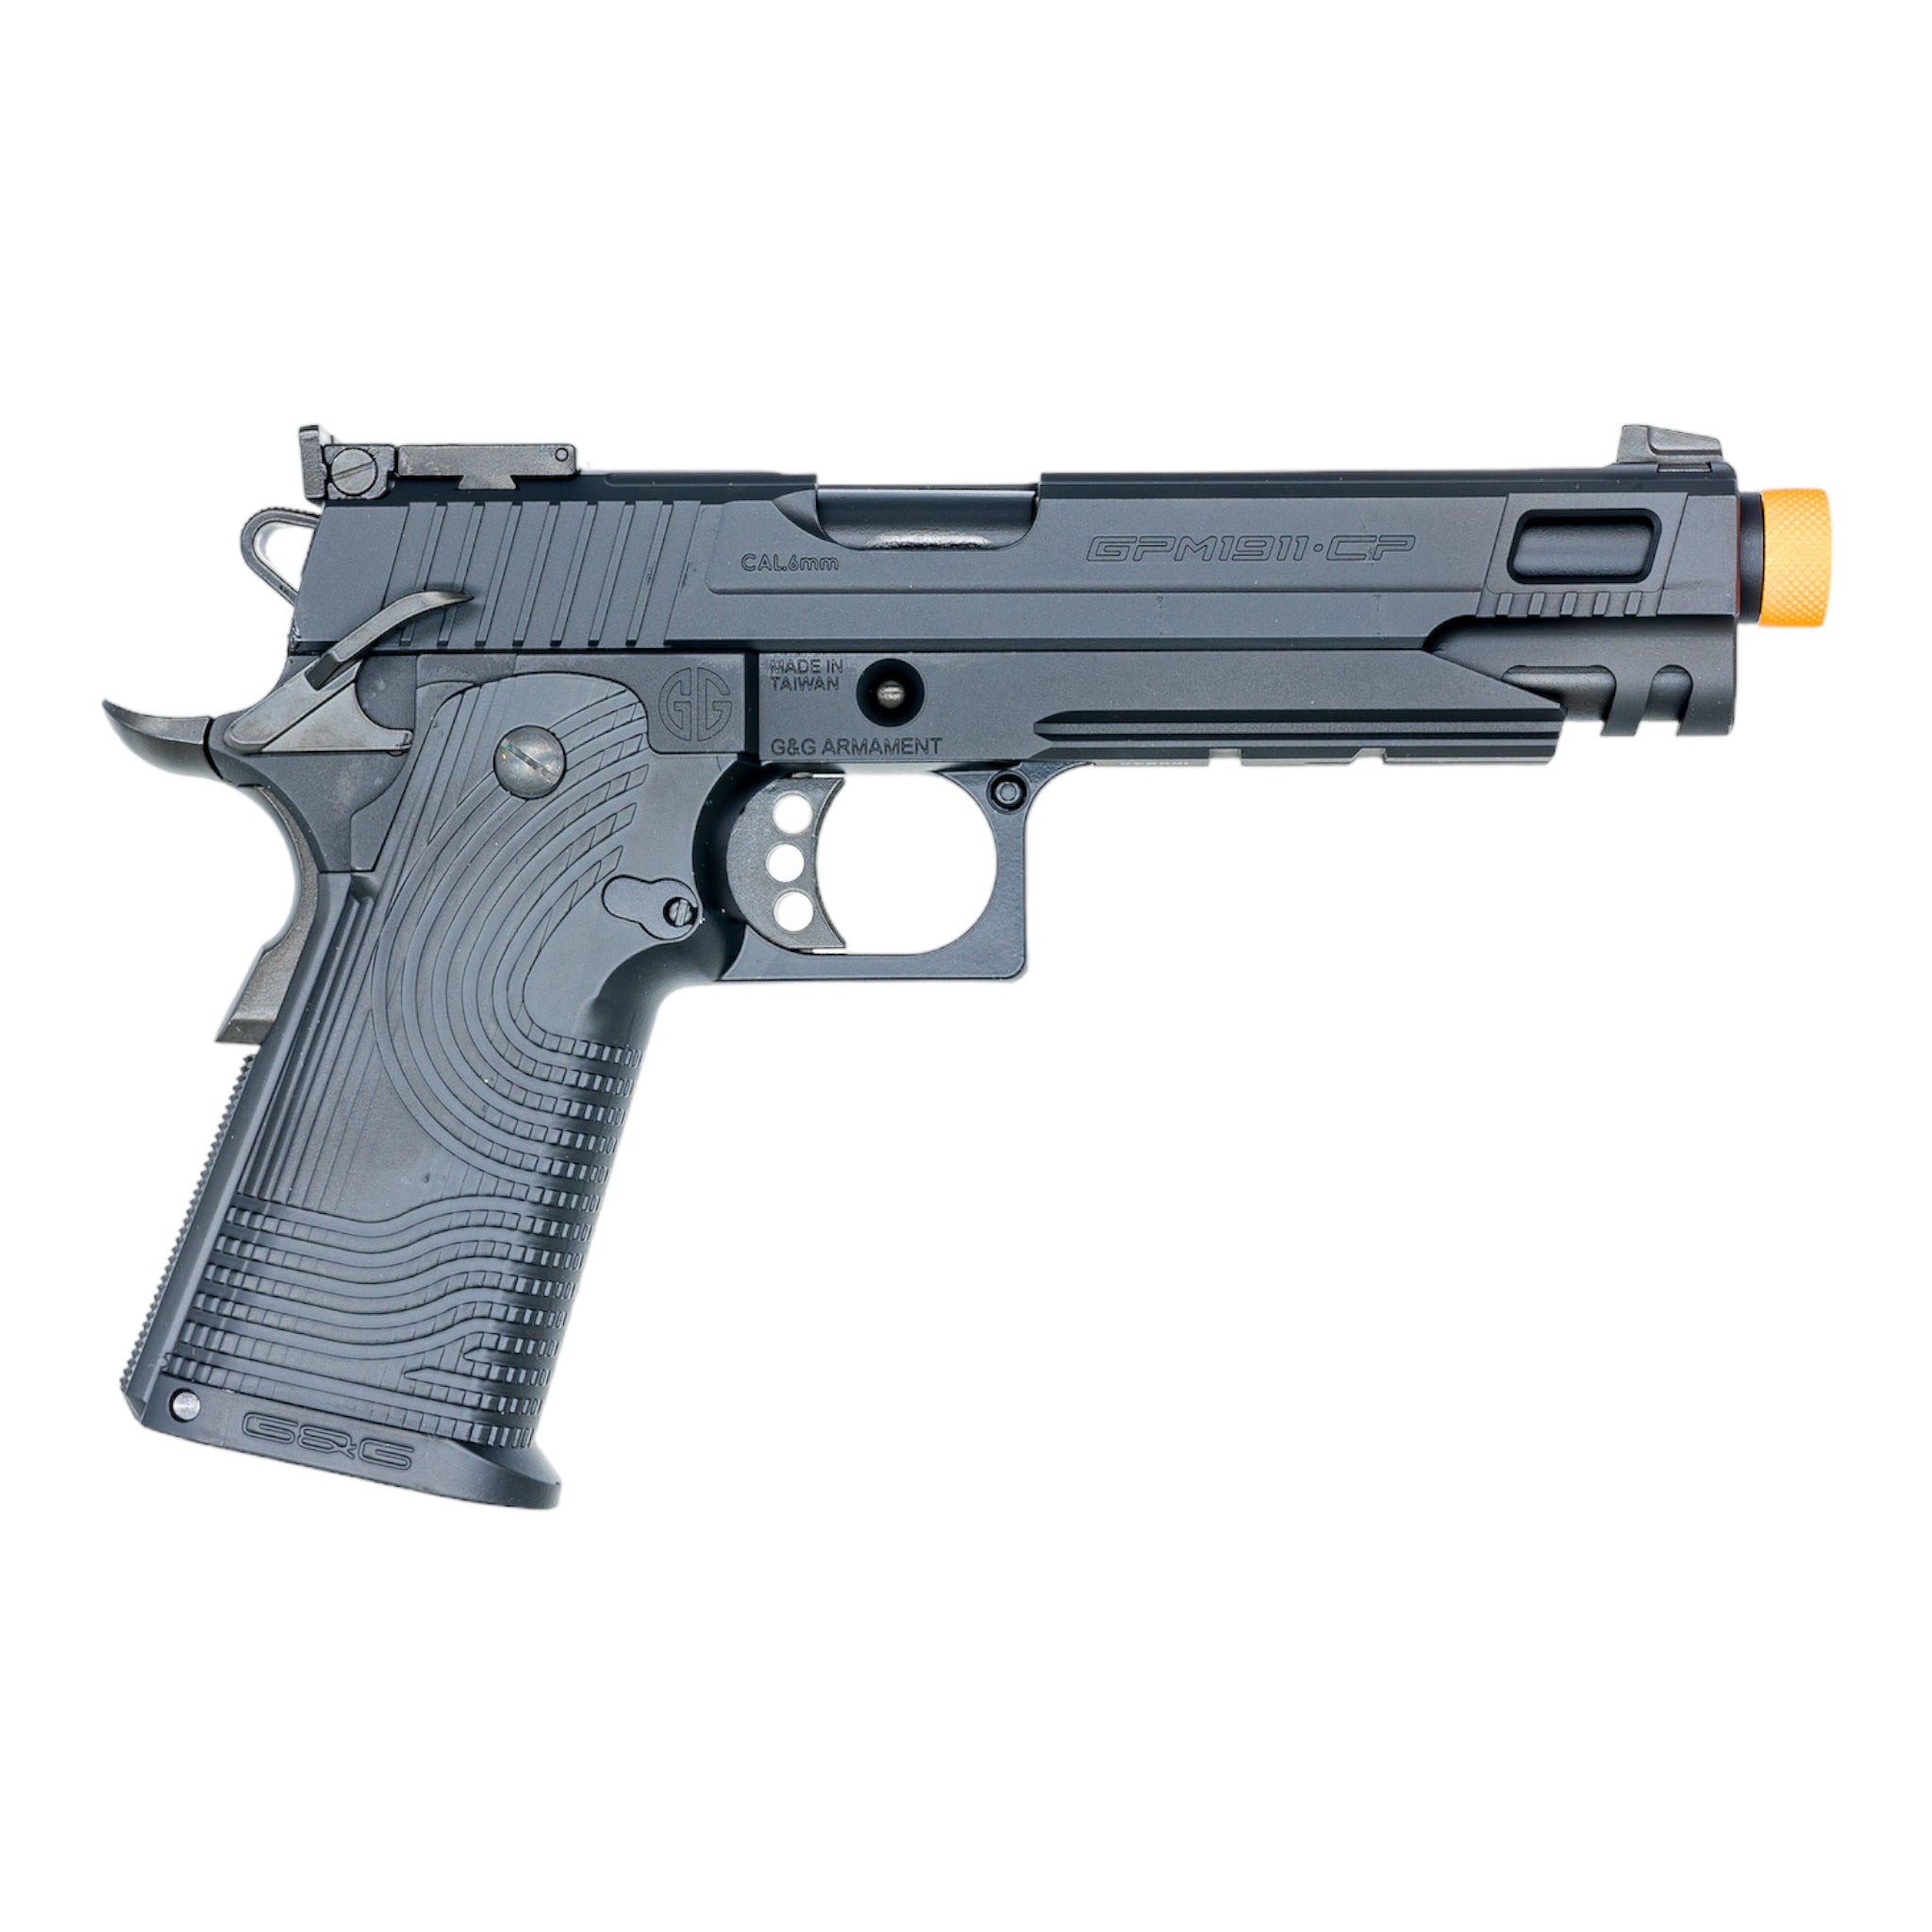 G&G GPM1911 CP MS MK I Gas Blowback Airsoft Pistol - ssairsoft.com